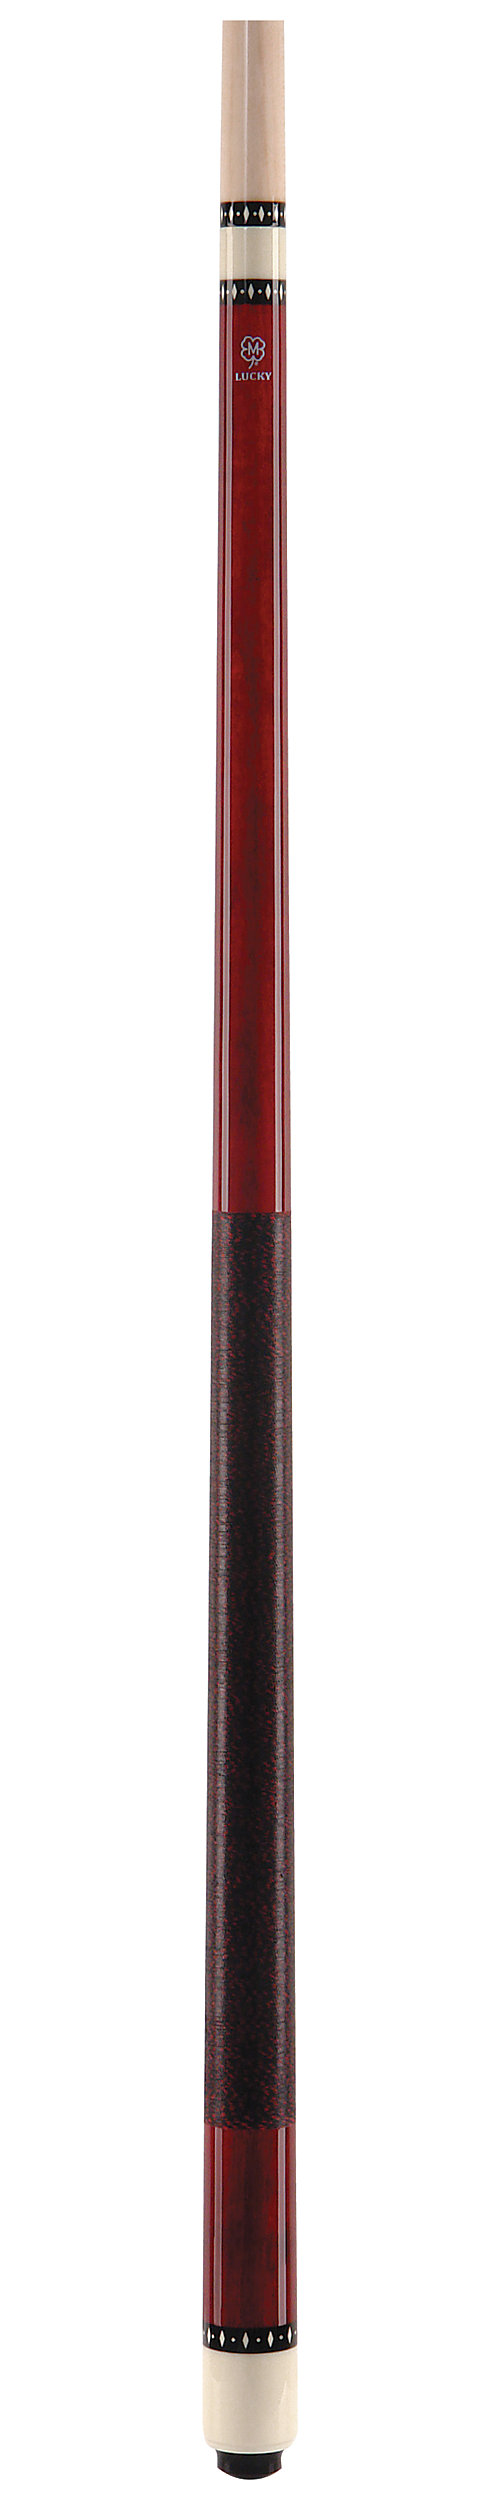 FREE SAME DAY SHIPPING McDermott Lucky L6 Pool Cue & Felt Sleeve Case IN STOCK